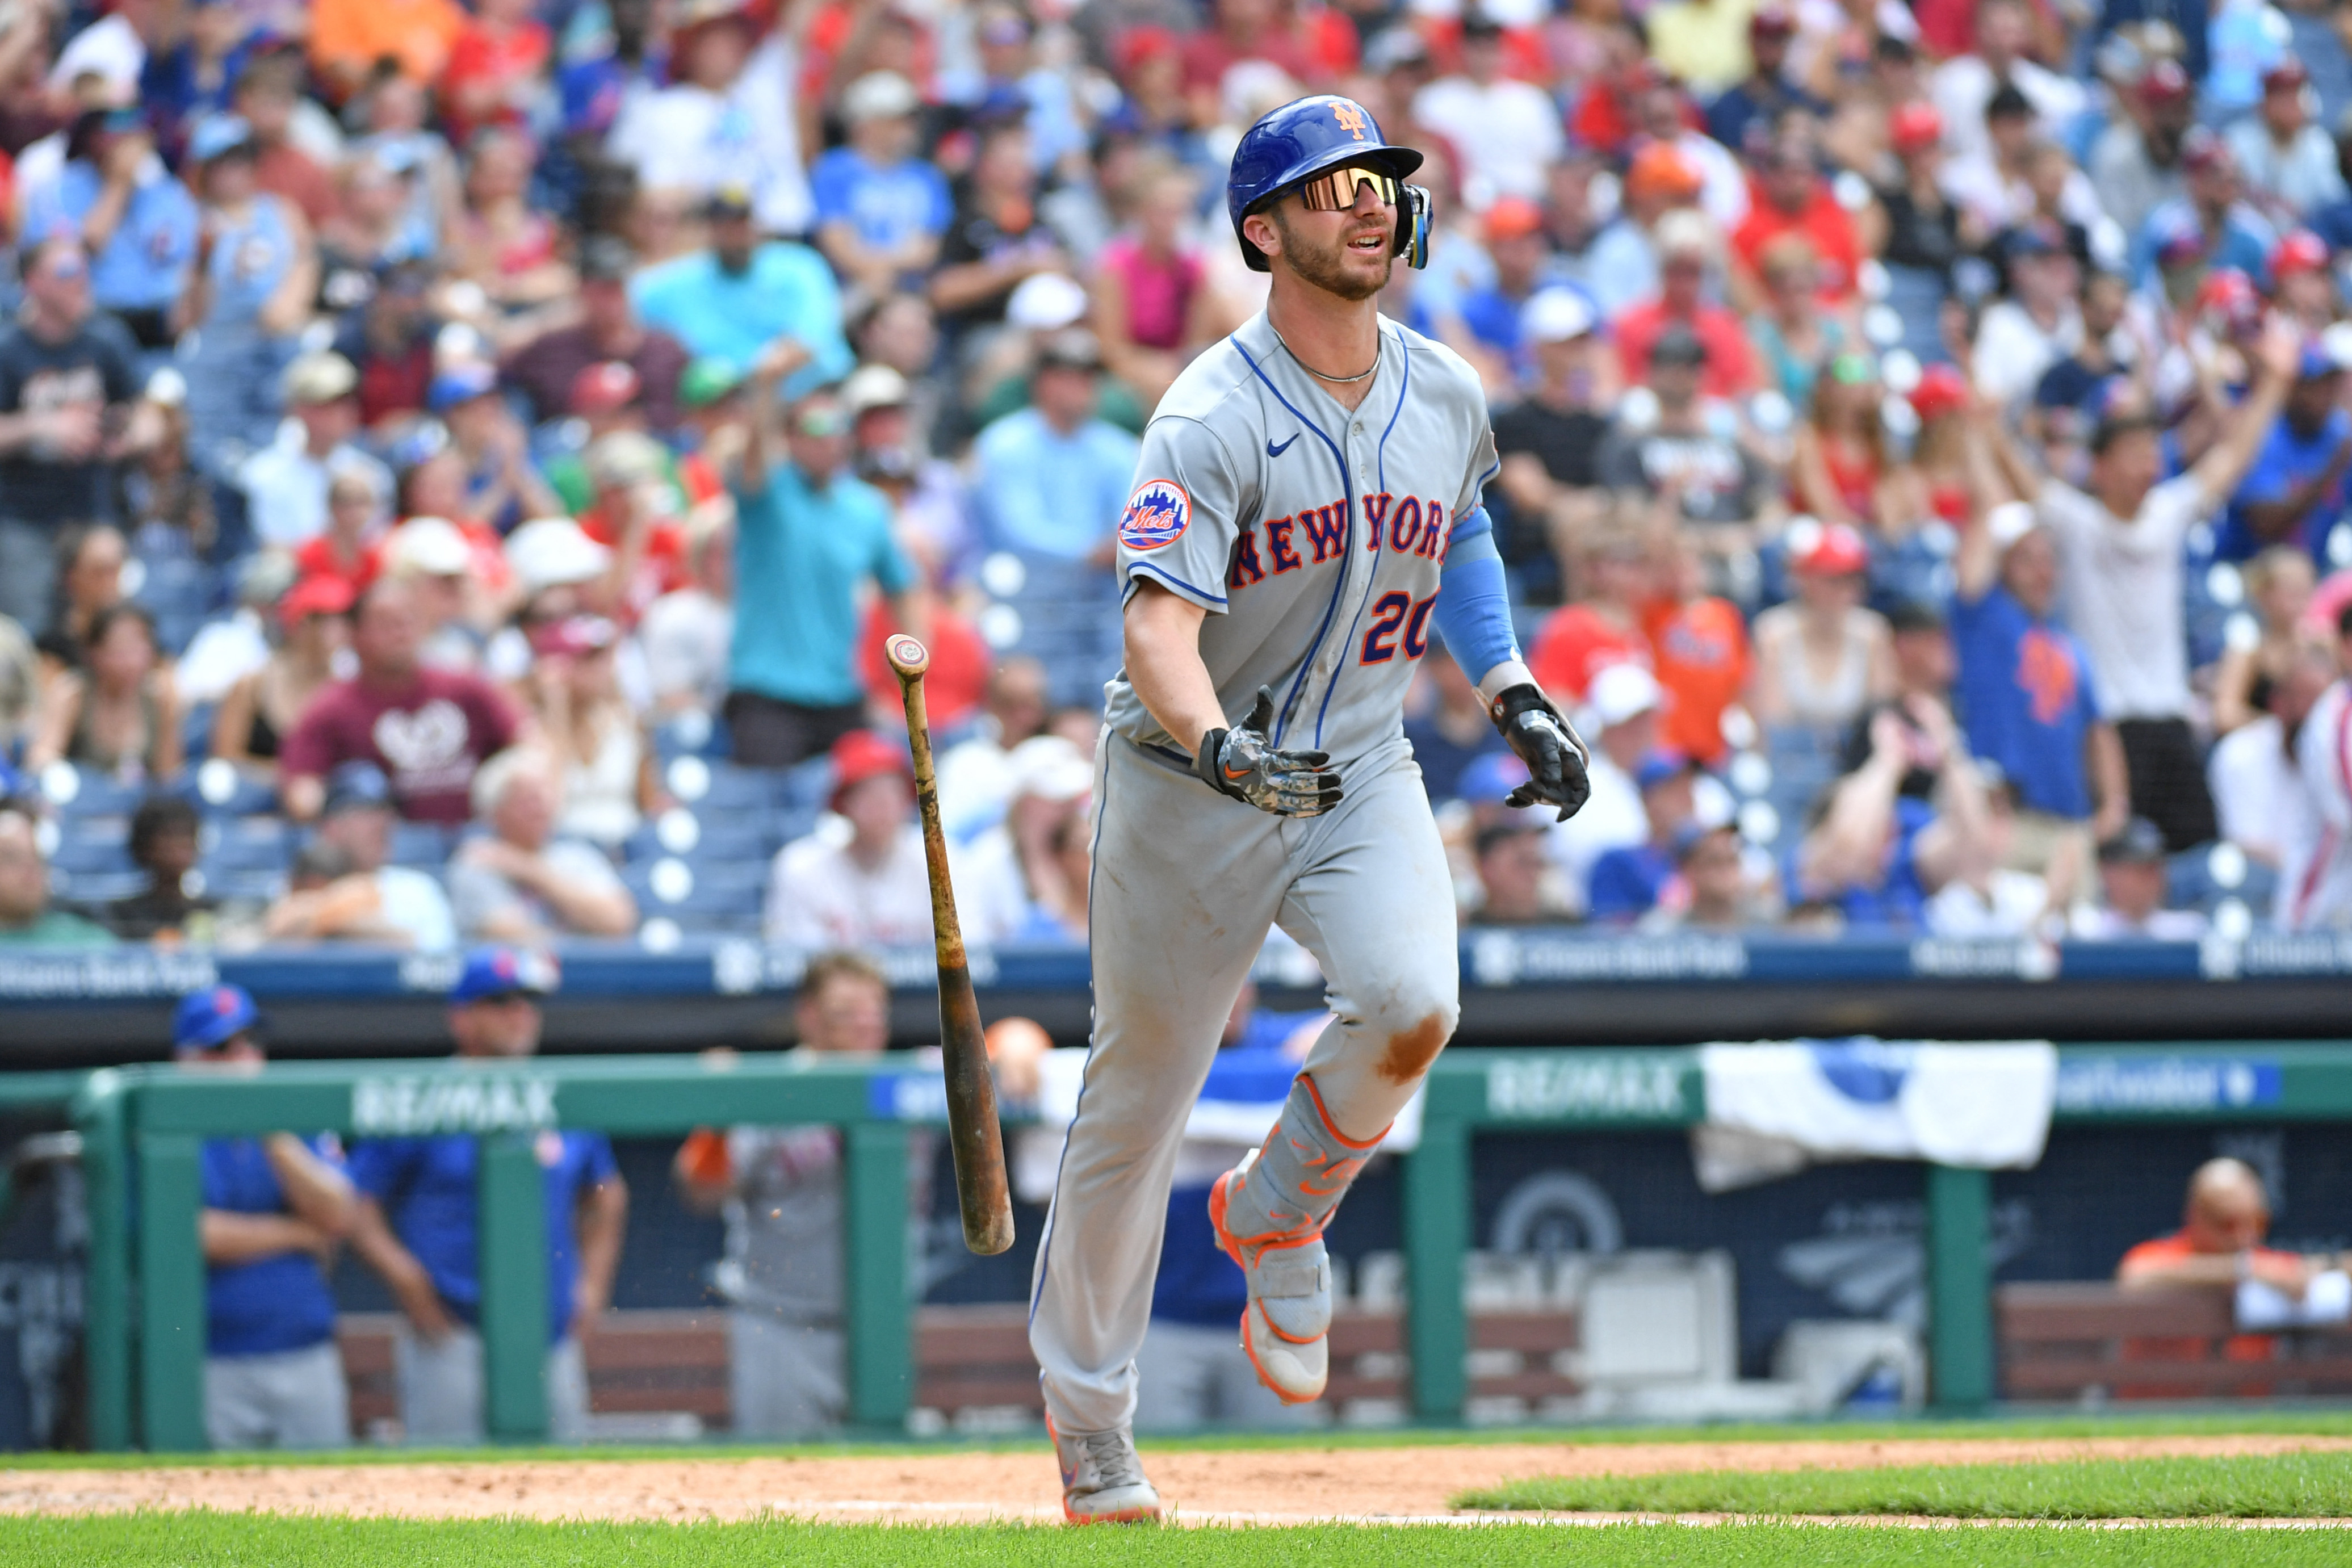 This Week in Mets Quotes: Max is mad at the umps and hanging